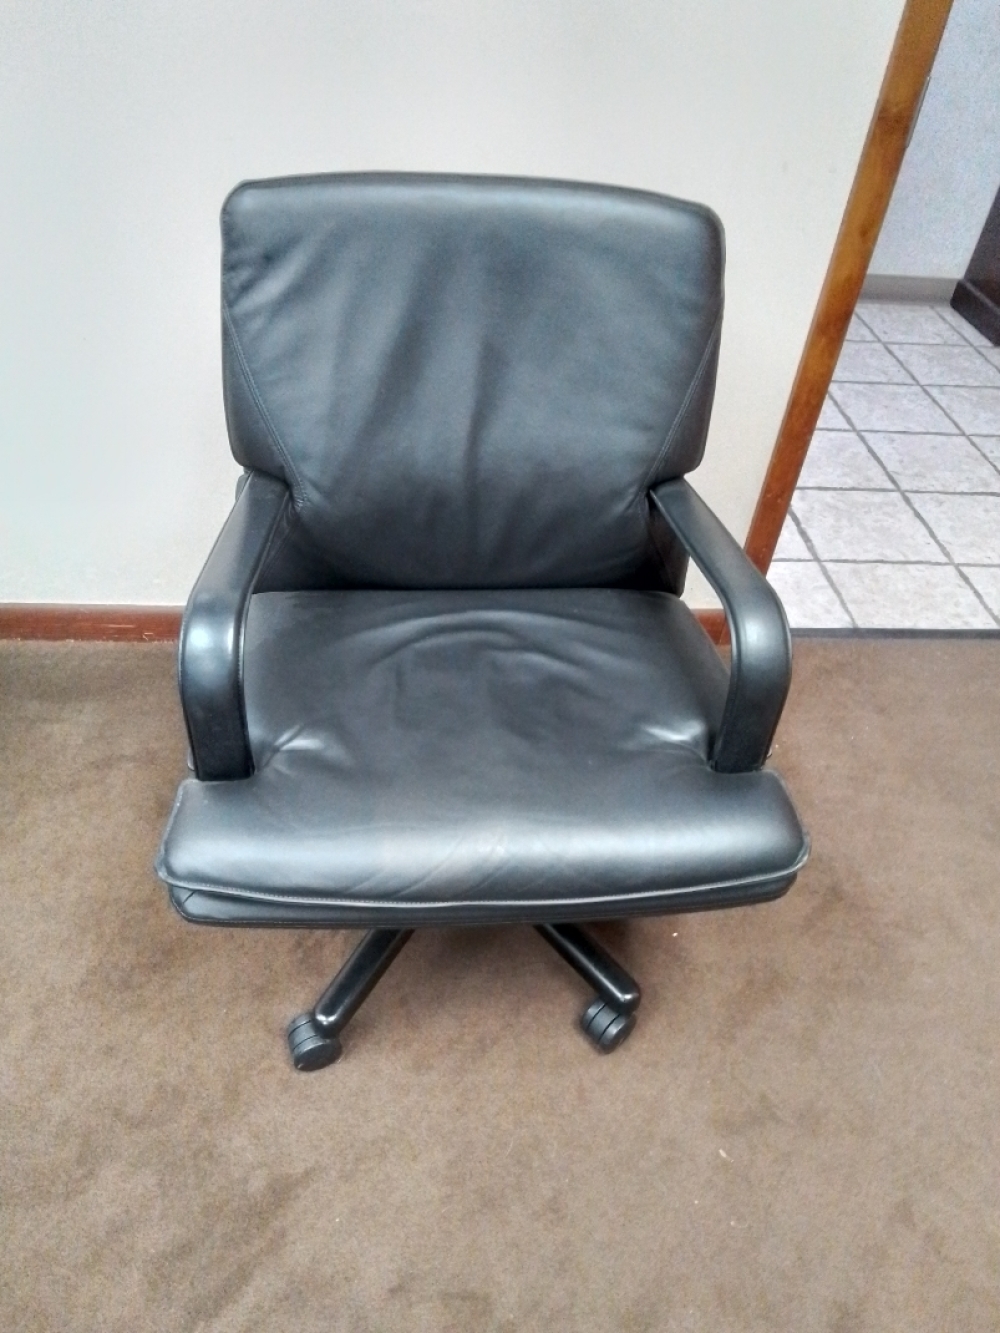  Black leather chair Geiger